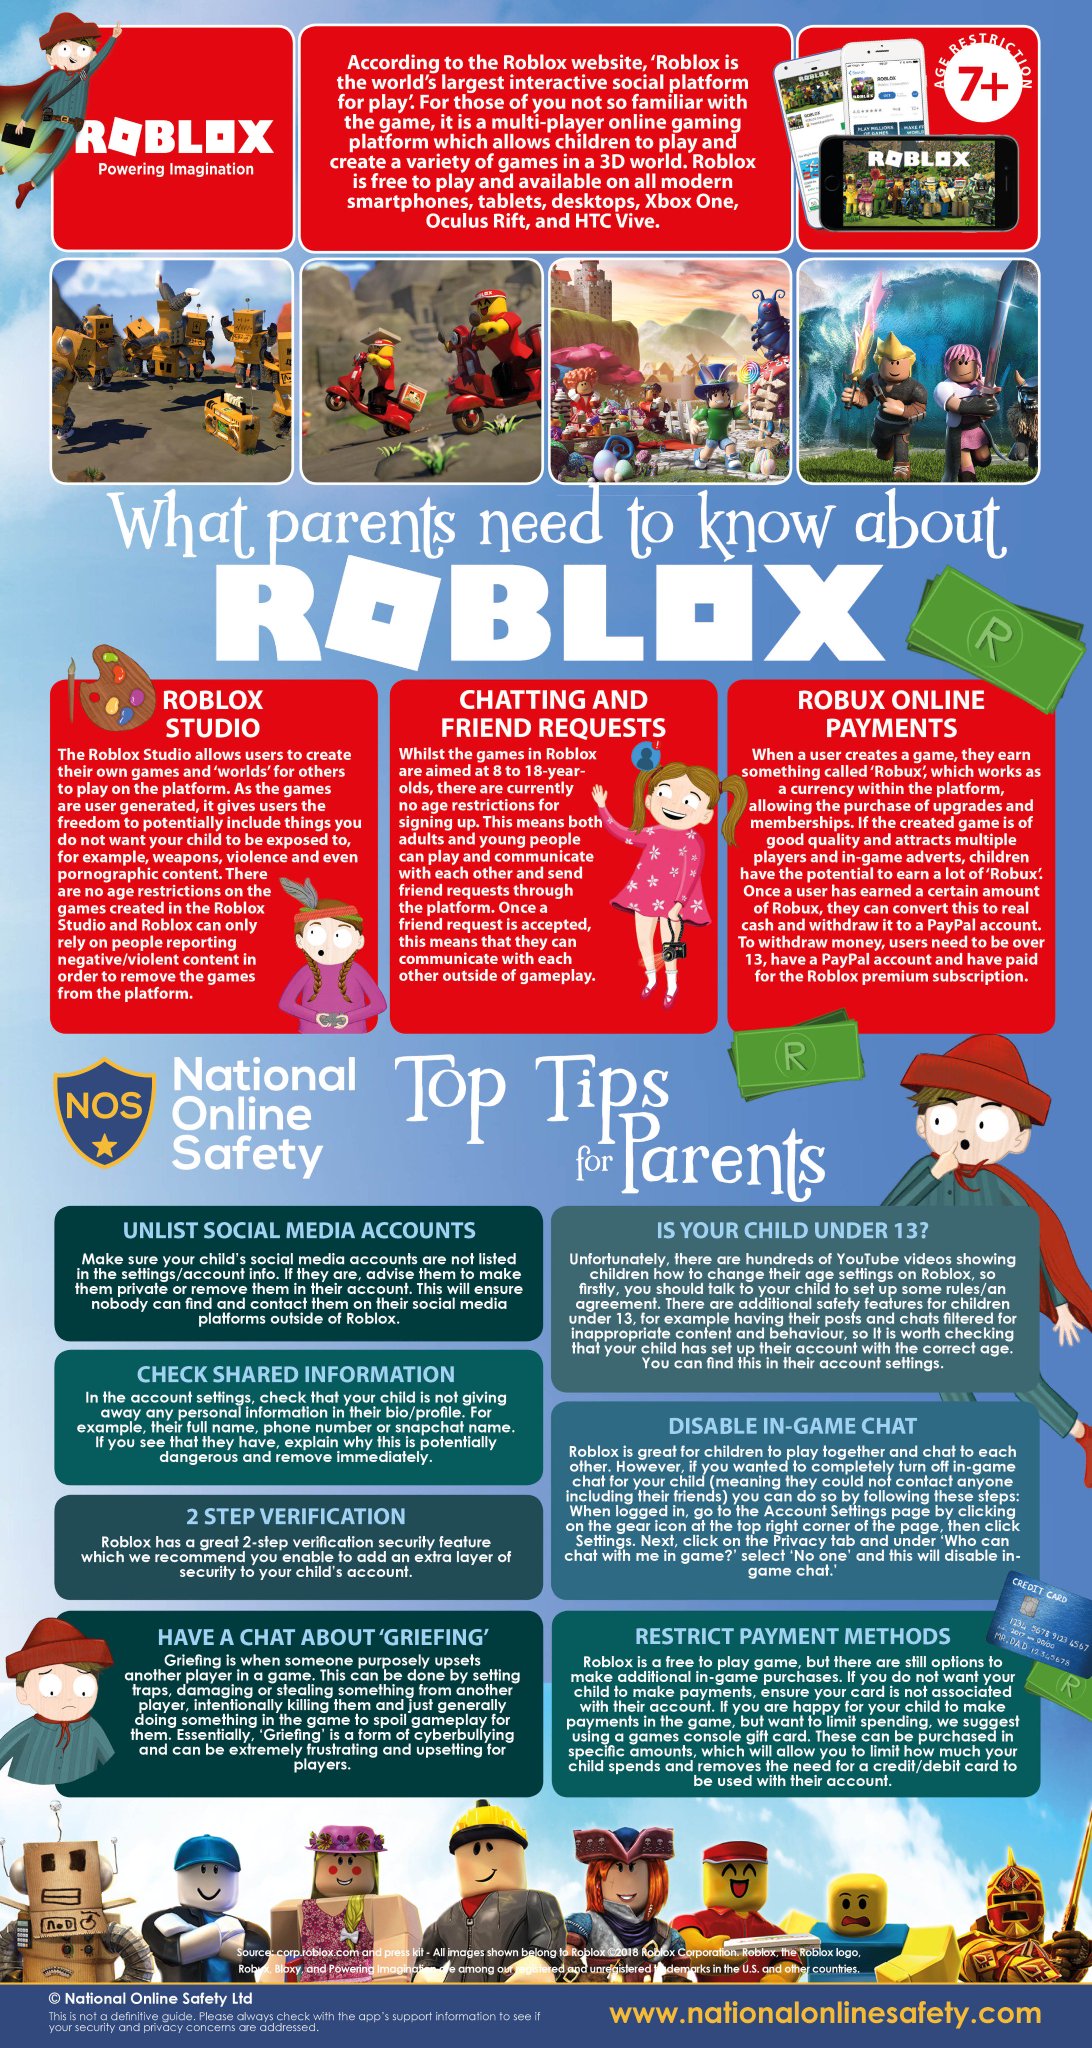 National Online Safety On Twitter If You Are Concerned About Your Child Playing Roblox Take A Look At Our Free Guide For Parents You Can Download The Guide Here Https T Co 4qee41hqe7 Roblox Onlinesafety